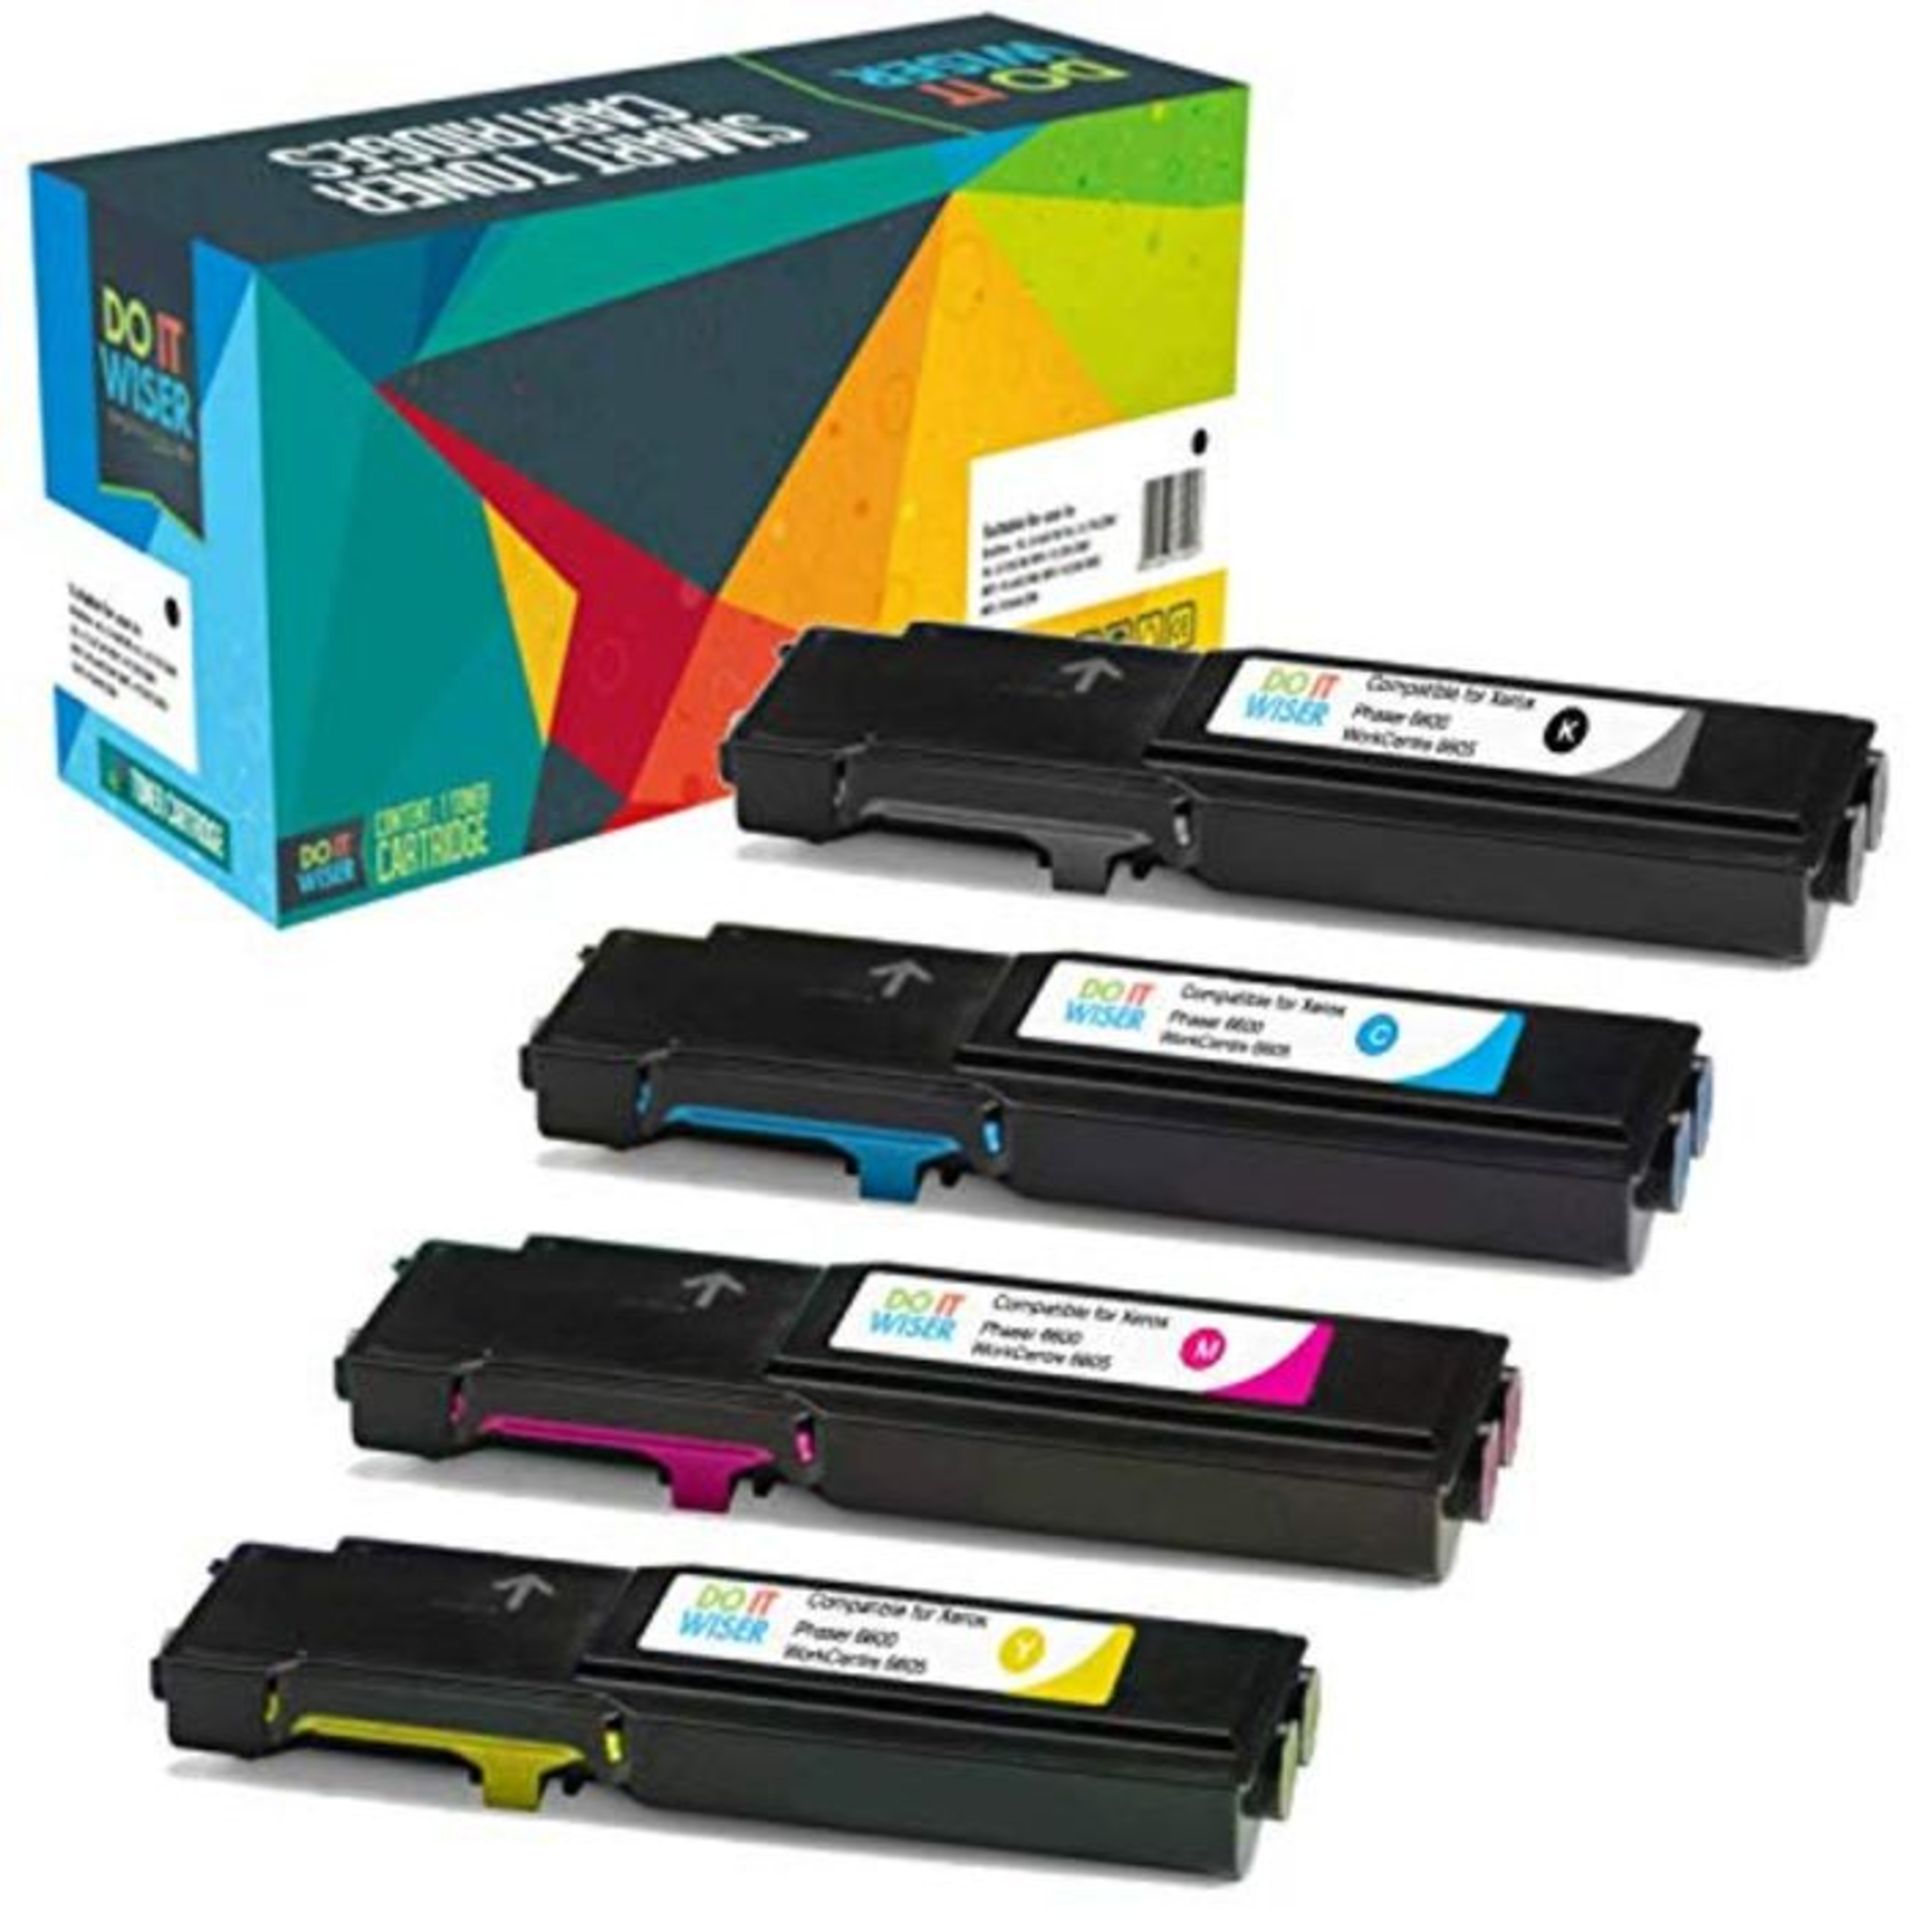 Do it wiser Compatible Toner Cartridge Replacement for Xerox Phaser 6600 6600N 6600DN